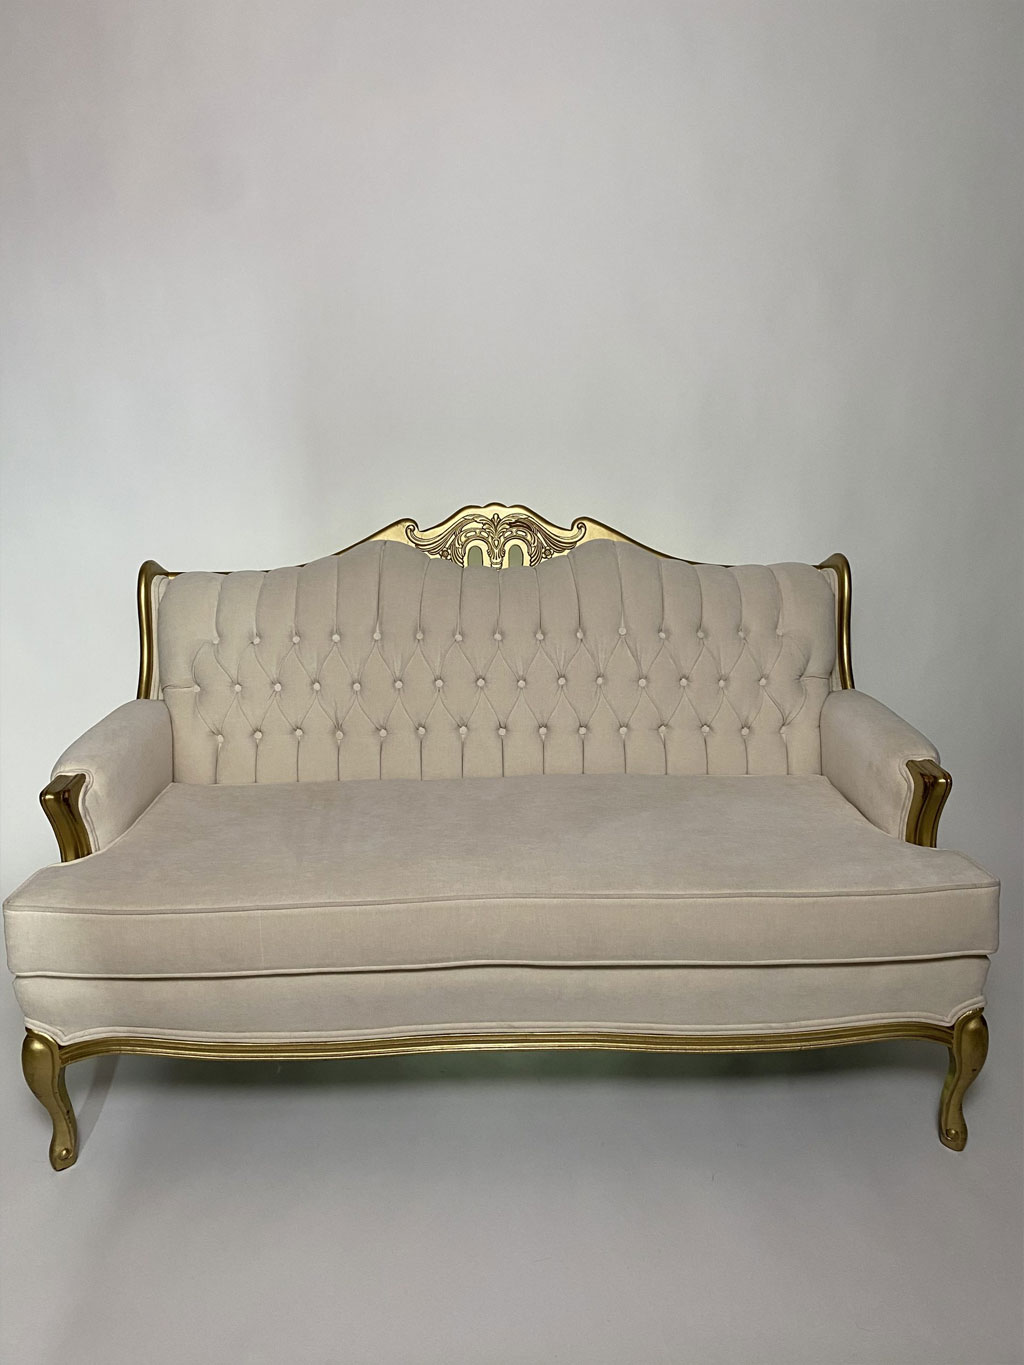 Professionally upholstered in Diamond Tufting with Gold Trim